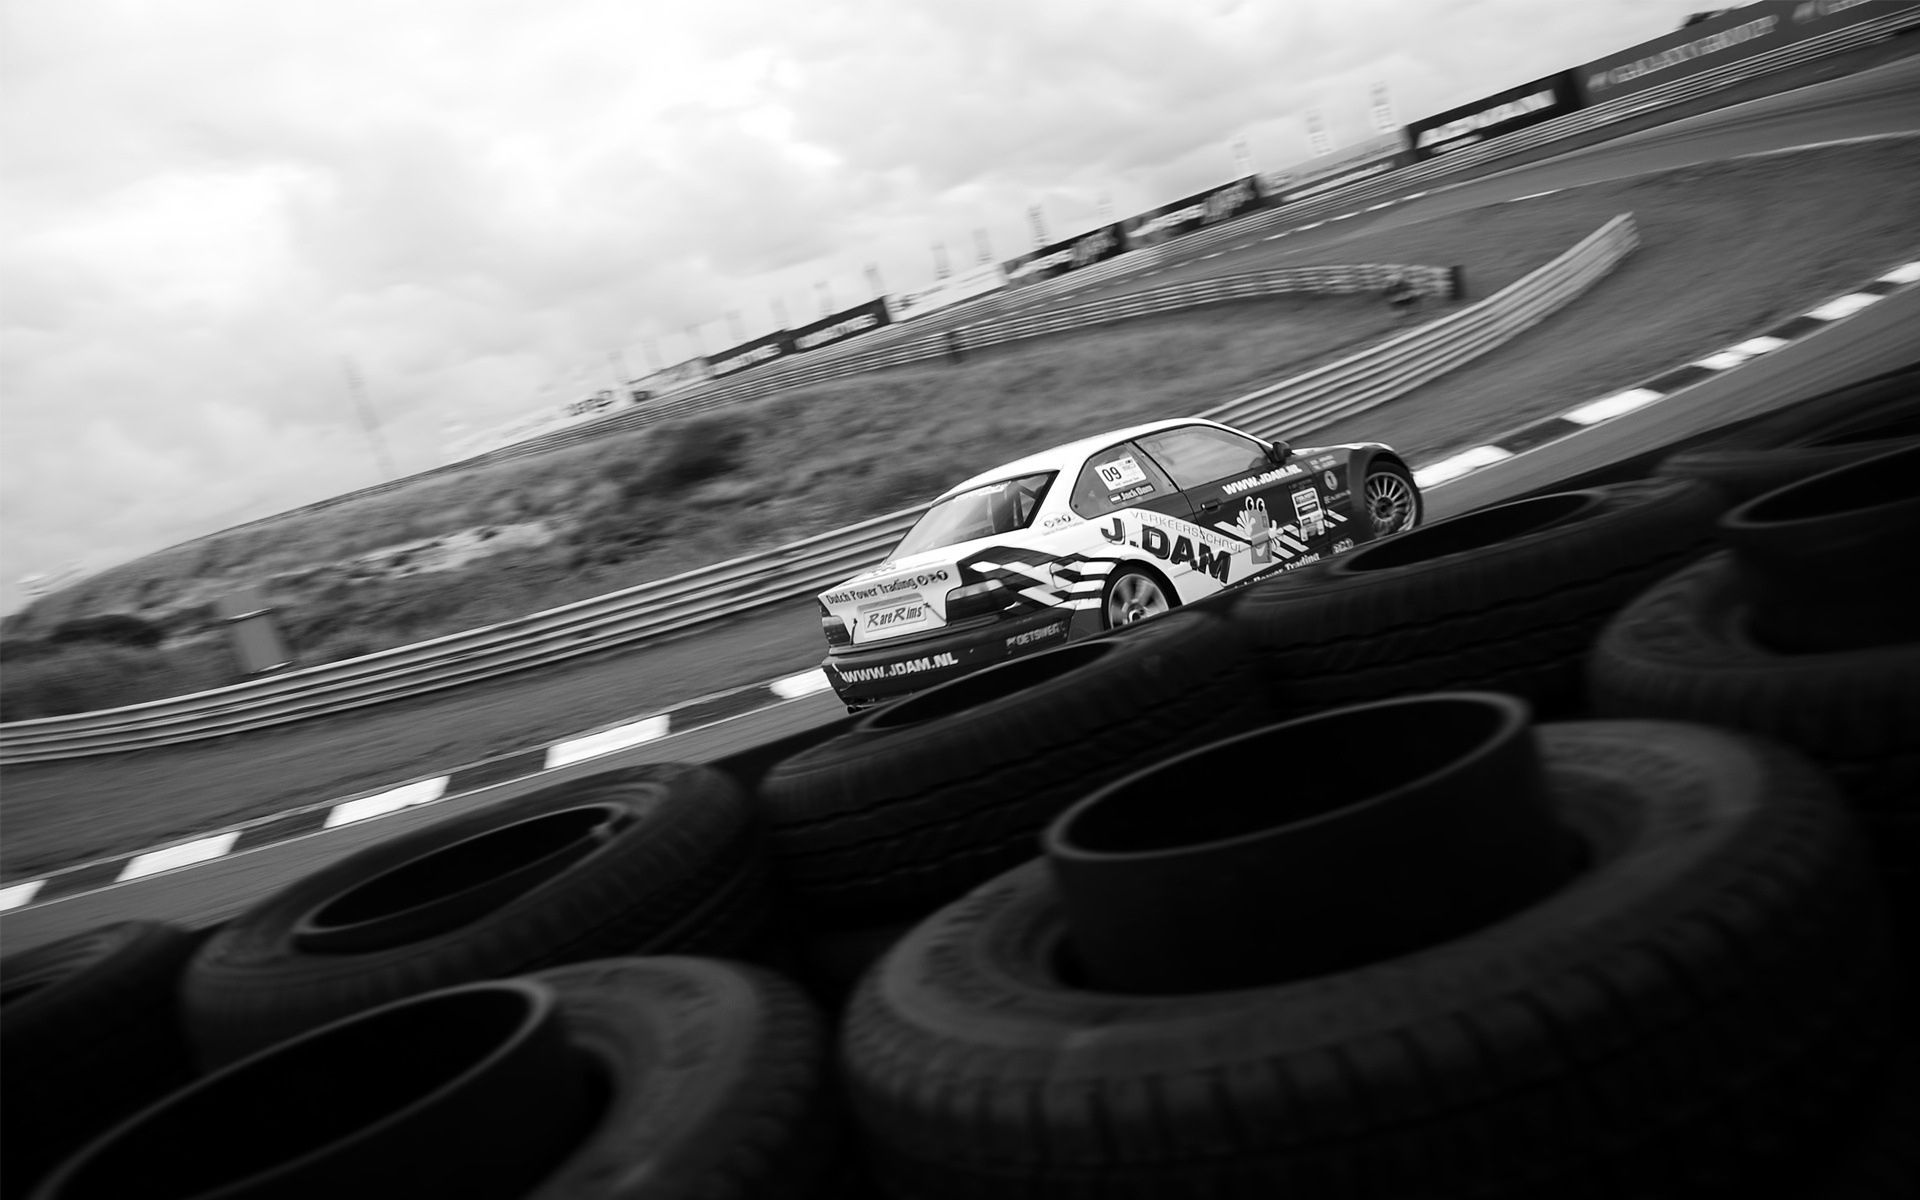 races, sports, rally, track, racing car, route, race car, tires